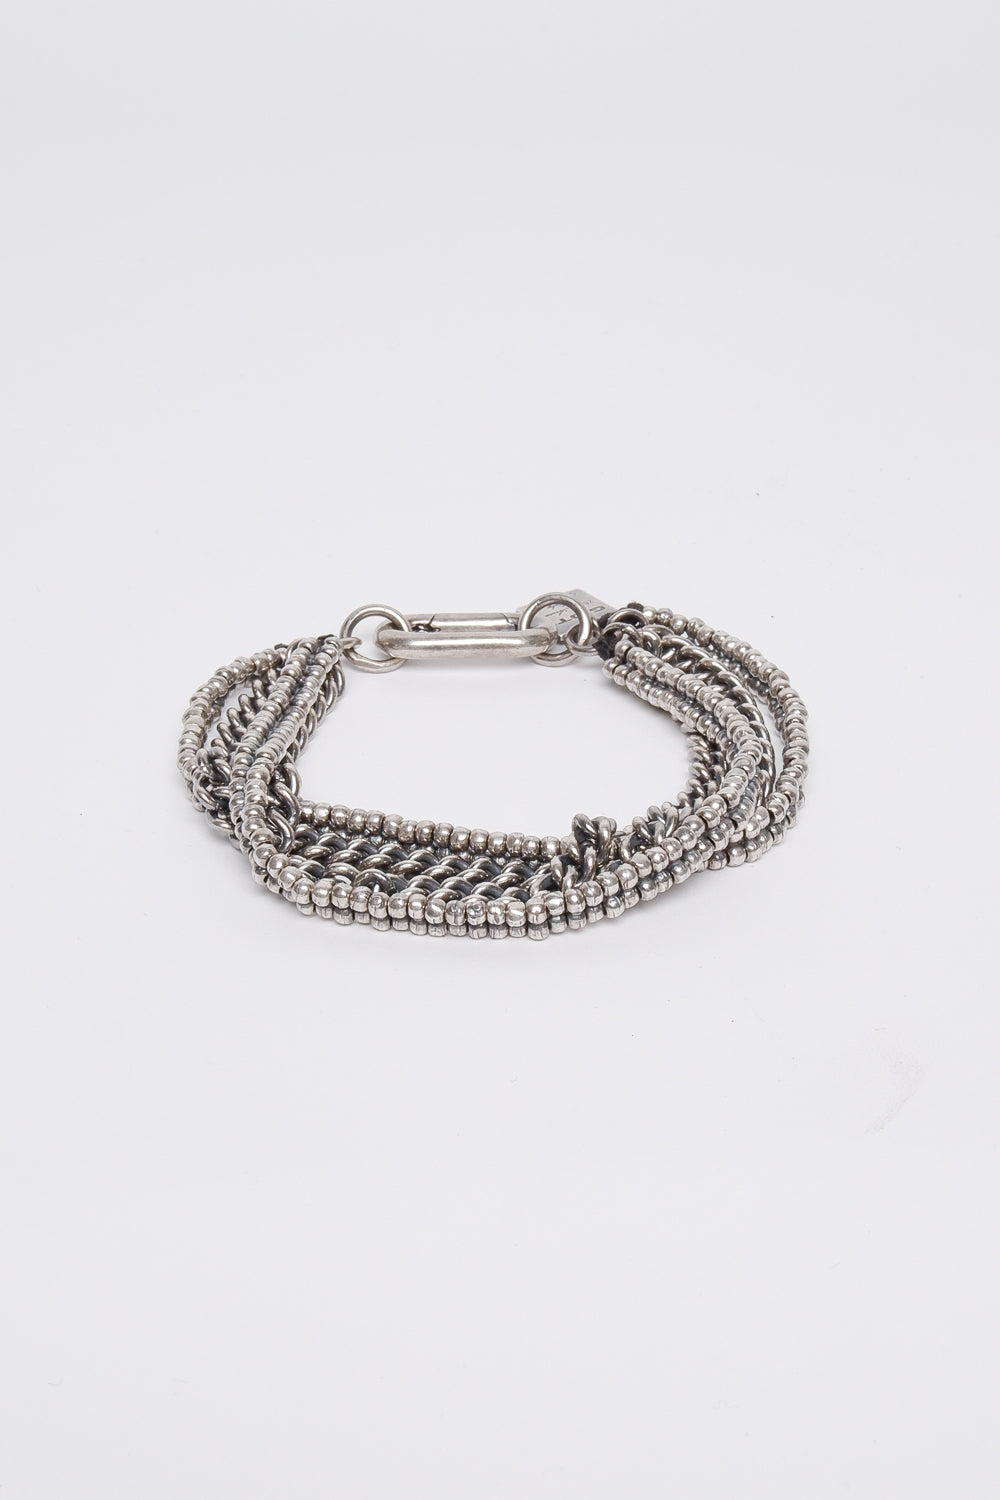 Buy the BR2214 Bracelet Bracelet at Intro. Spend £50 for free UK delivery. Official stockists. We ship worldwide.